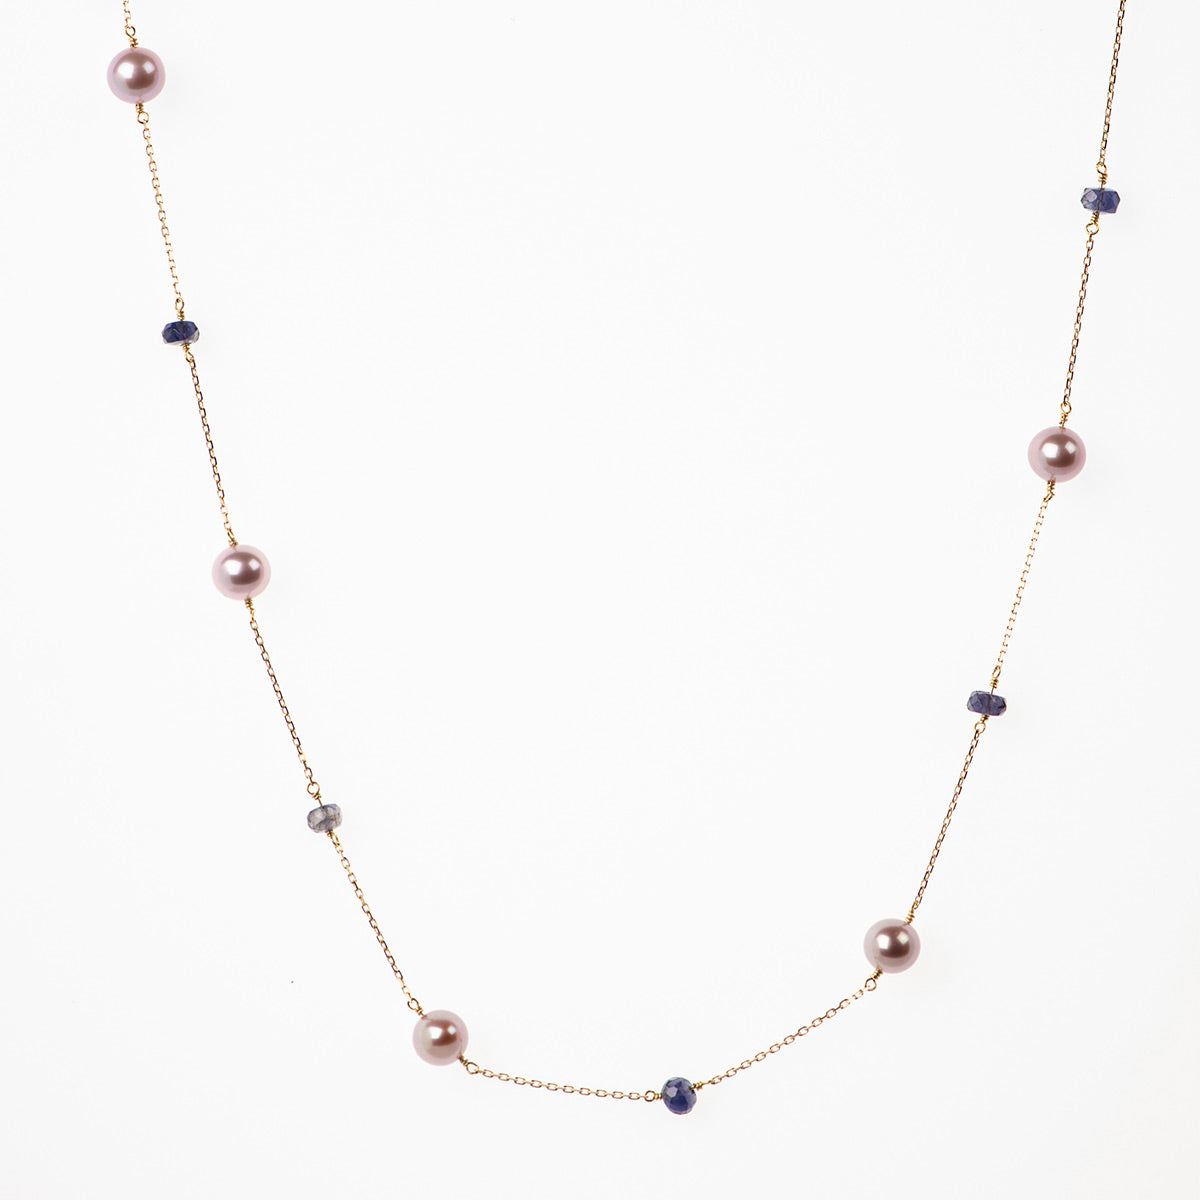 LILAC PEARLS NECKLACE WITH IOLITES - Politia Jewelry